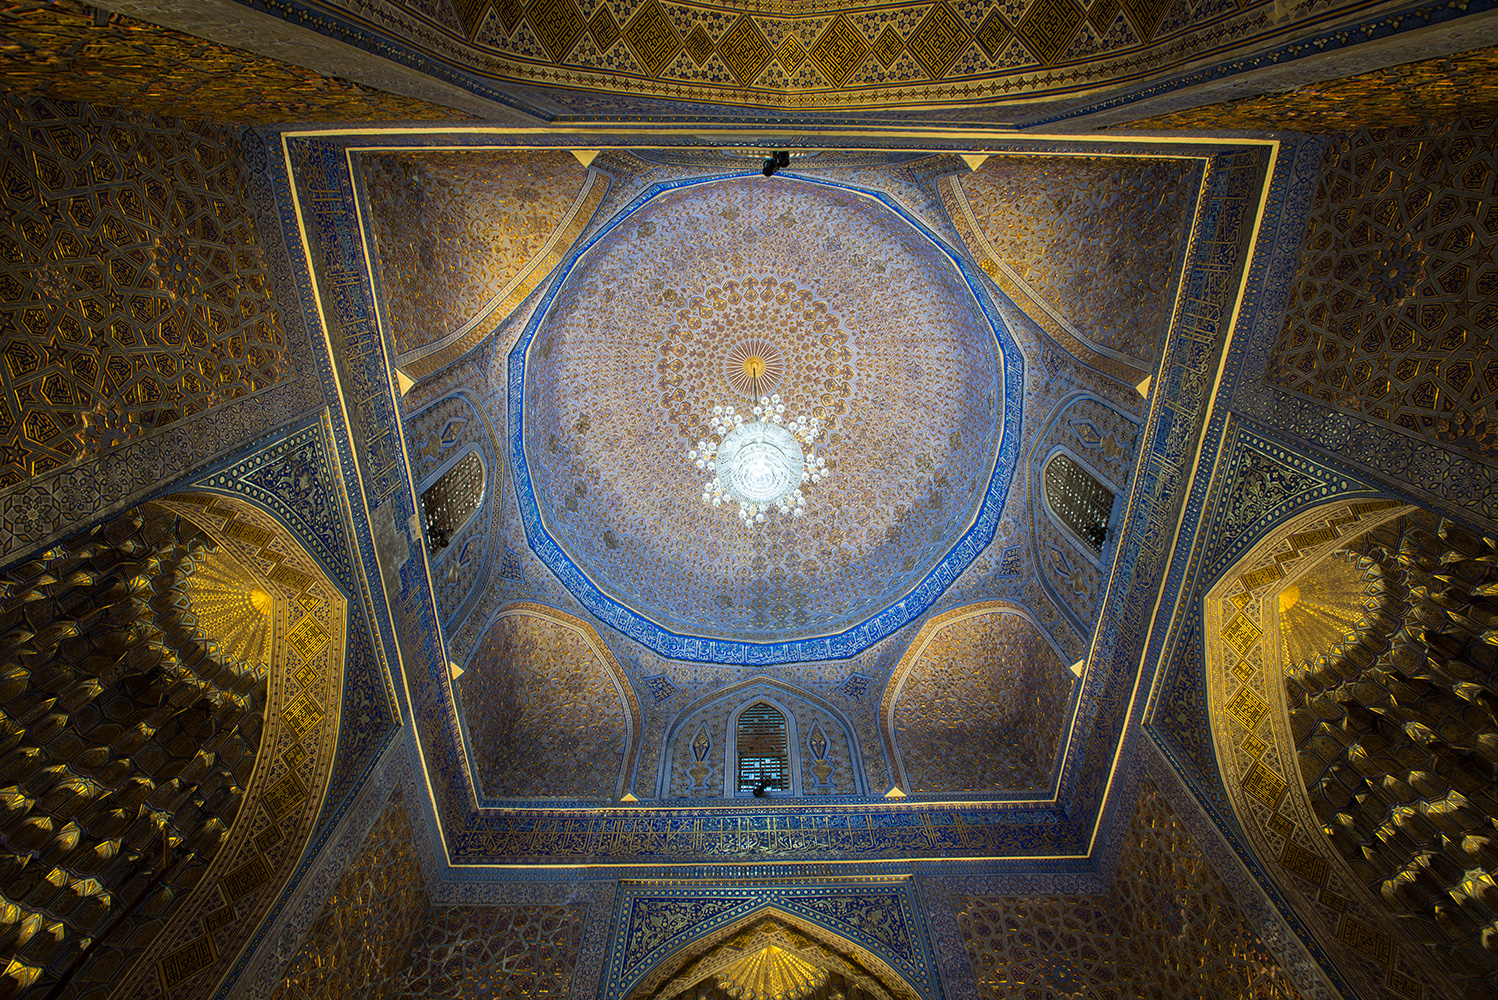 The Mausoleum of the Emir Timur.The domed roof.